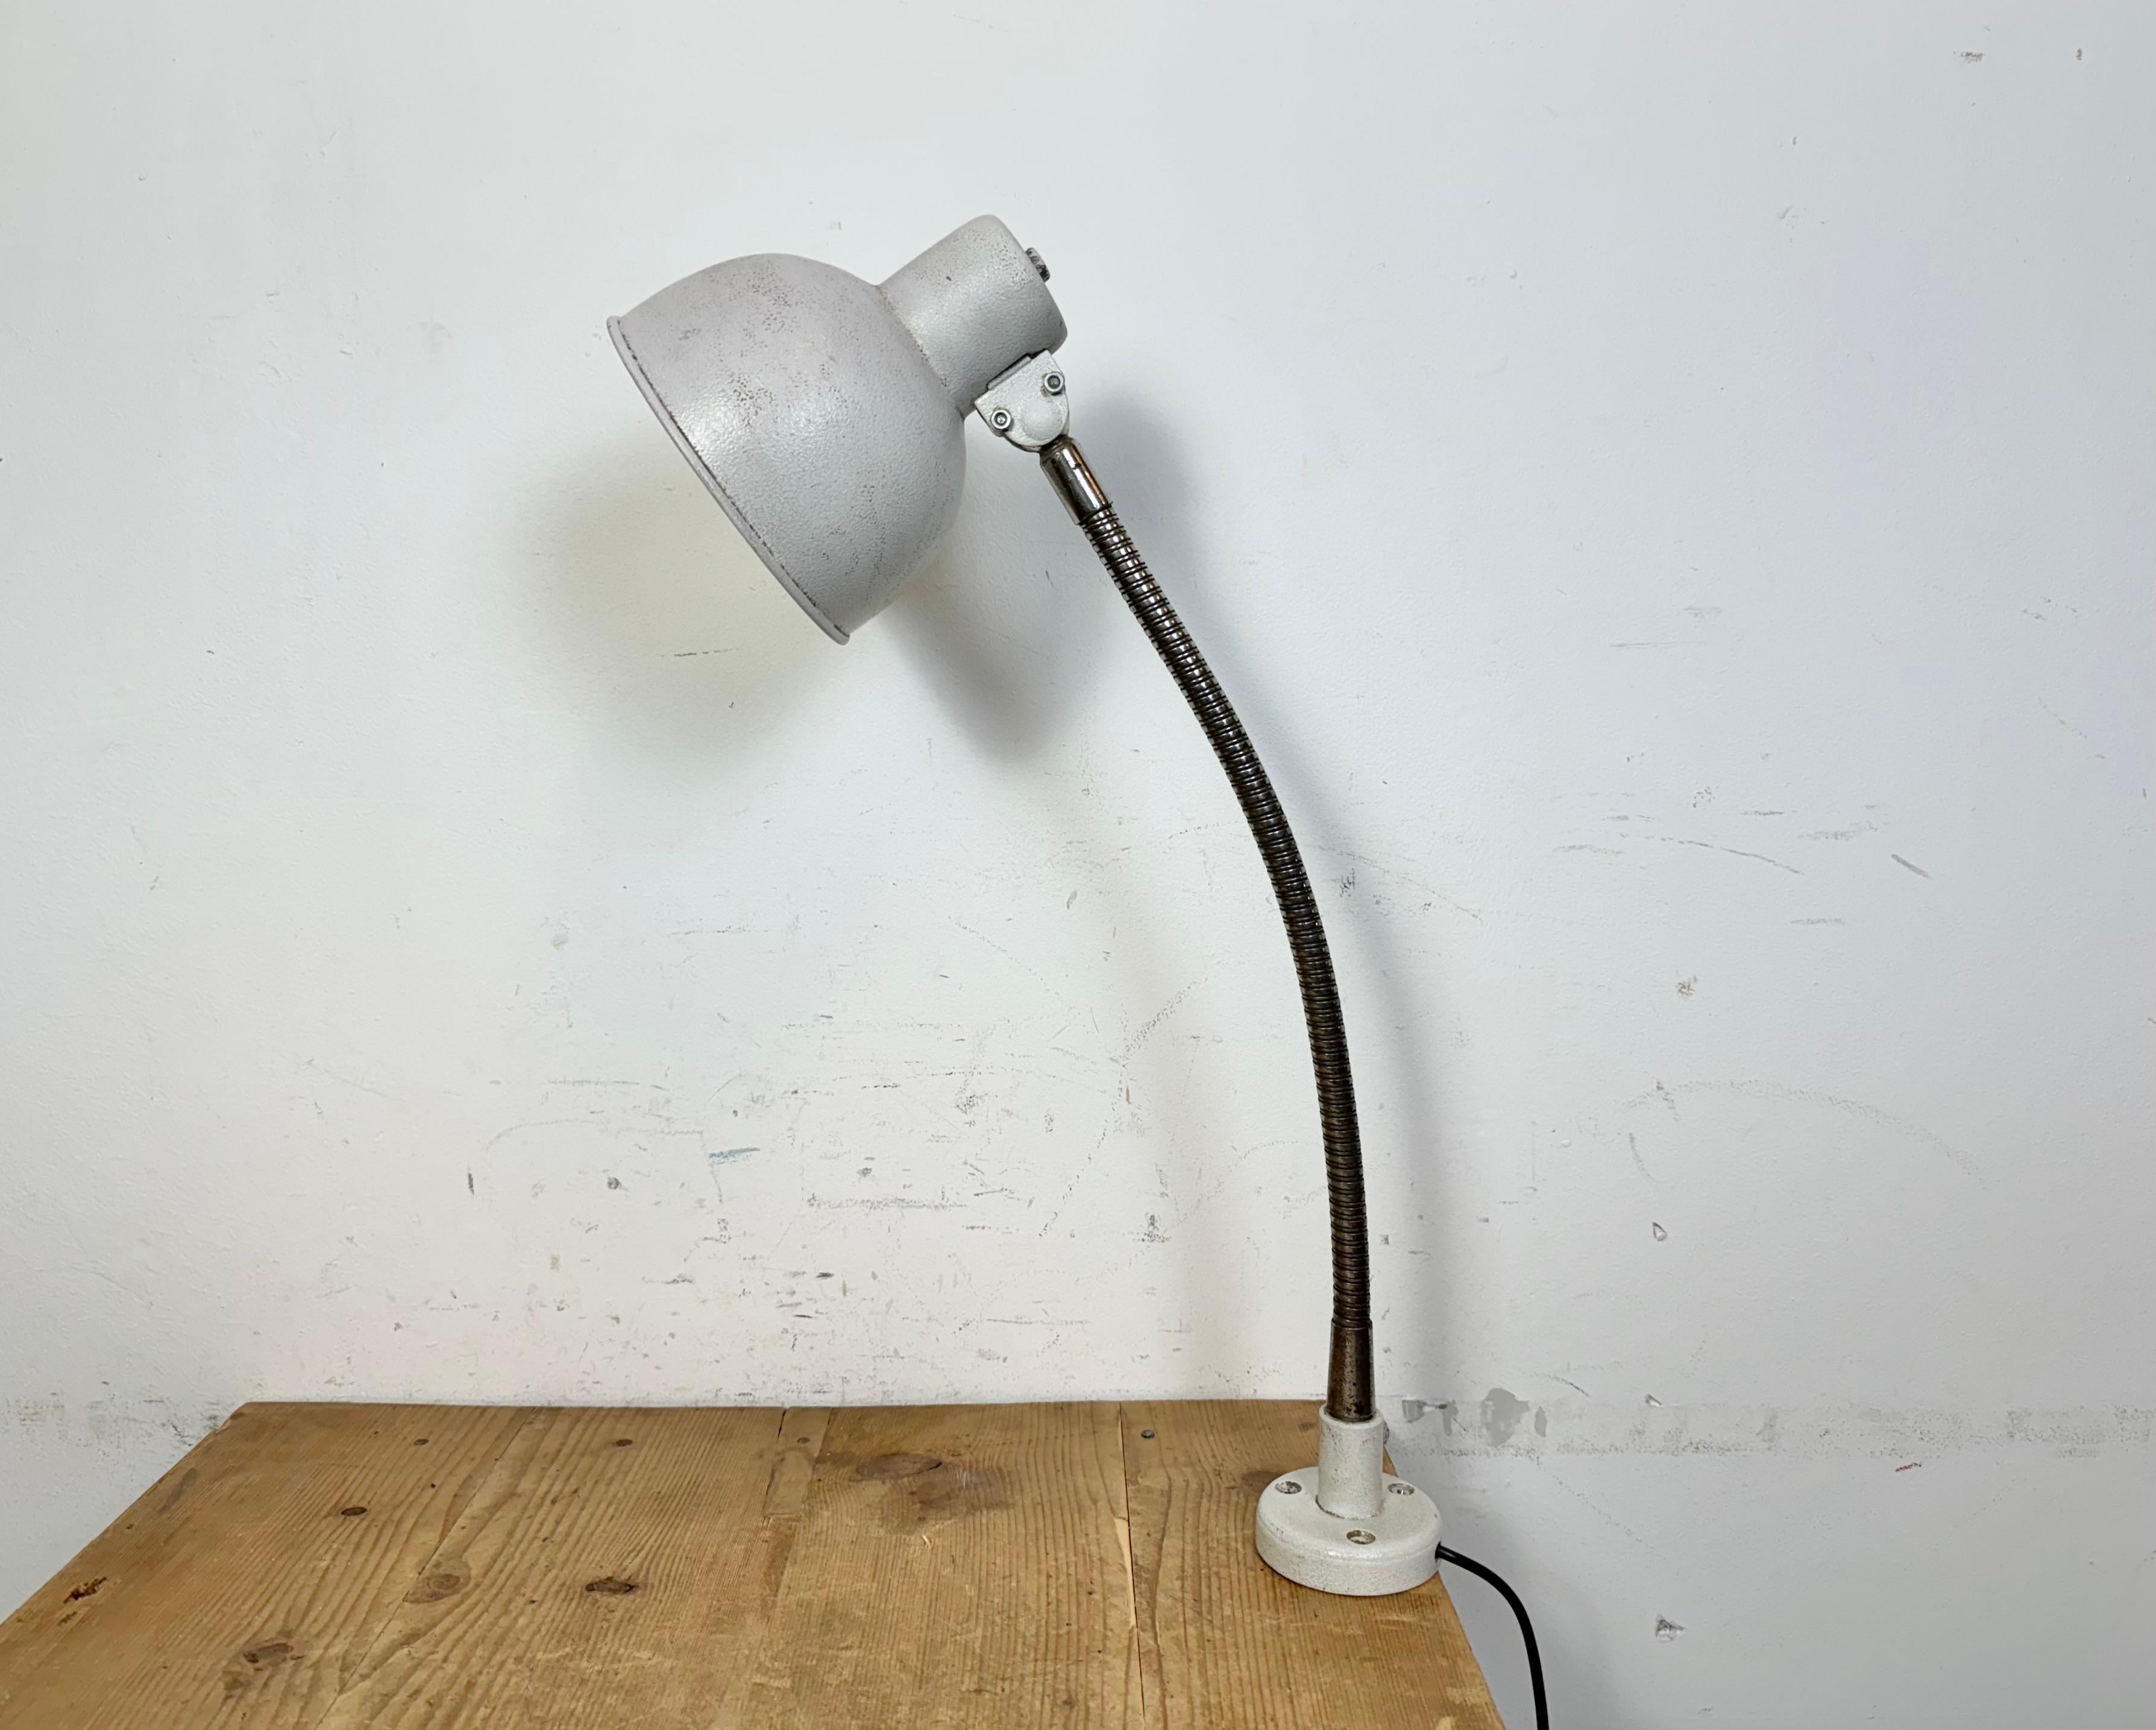 Industrial adjustable workshop table lamp made in former Czechoslovakia during the 1960s.It features a grey iron base and shade and a chrome plated gooseneck. The original socket requires standard E27/E26 lightbulbs. New wire.
The diameter of the